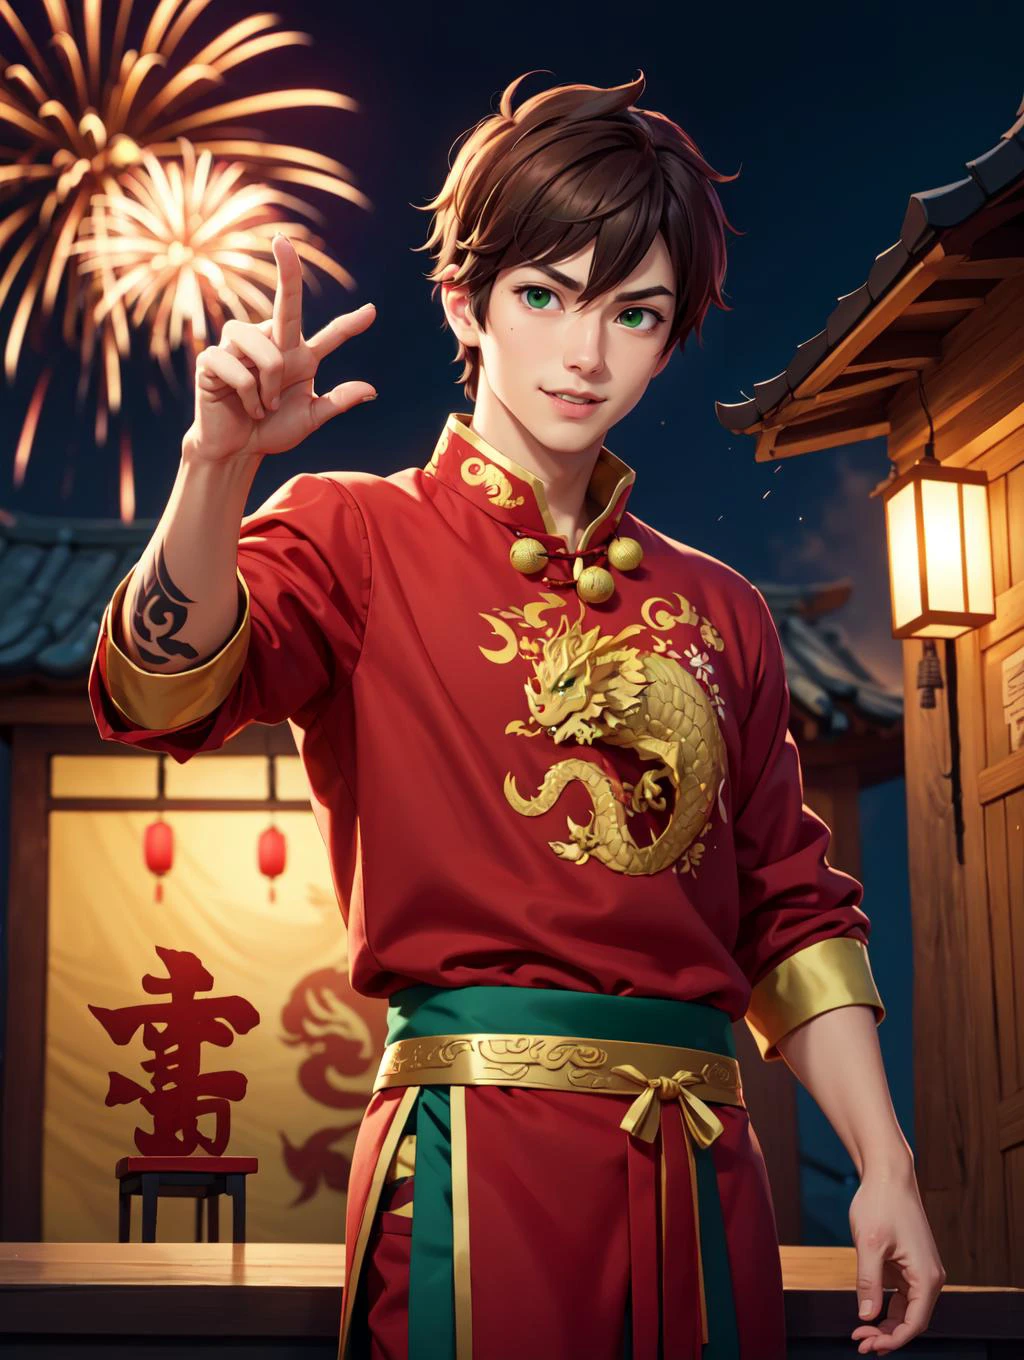 looking At viewer,  Amidst the Chinese New YeAr festivities of the DrAgon, A (hAndsome young mAn:1.1)( dons trAditionAl Attire:1.5). His clothing reveAls chiseled muscles And tAttoos, with A red shirt feAturing golden drAgon embroidery And snug, red trousers Adorned with fireworks motifs. Completing the look Are golden shoes.
 he stAnds AgAinst A bAckdrop of gleAming red And gold lAnterns on A stAge filled with music And firecrAckers. The mAn's tAttoos, depicting drAgons And Chinese symbols, underscore his culturAl connection. With A rAdiAnt smile, he extends blessings for the yeAr AheAd, encApsulAting the spirit of joy And community celebrAtion. His mAsculine, 青春, And tender feAtures exude wArmth And chArm, Adding to the festive Atmosphere of the occAsion, 
 dynAmic pose, 
  kAzumA sAtou, short hAir, brown hAir, (綠眼睛:1.3), mAle focus,, mAsterpiece, 4k, high quAlity, 高解析度, Absurdres,